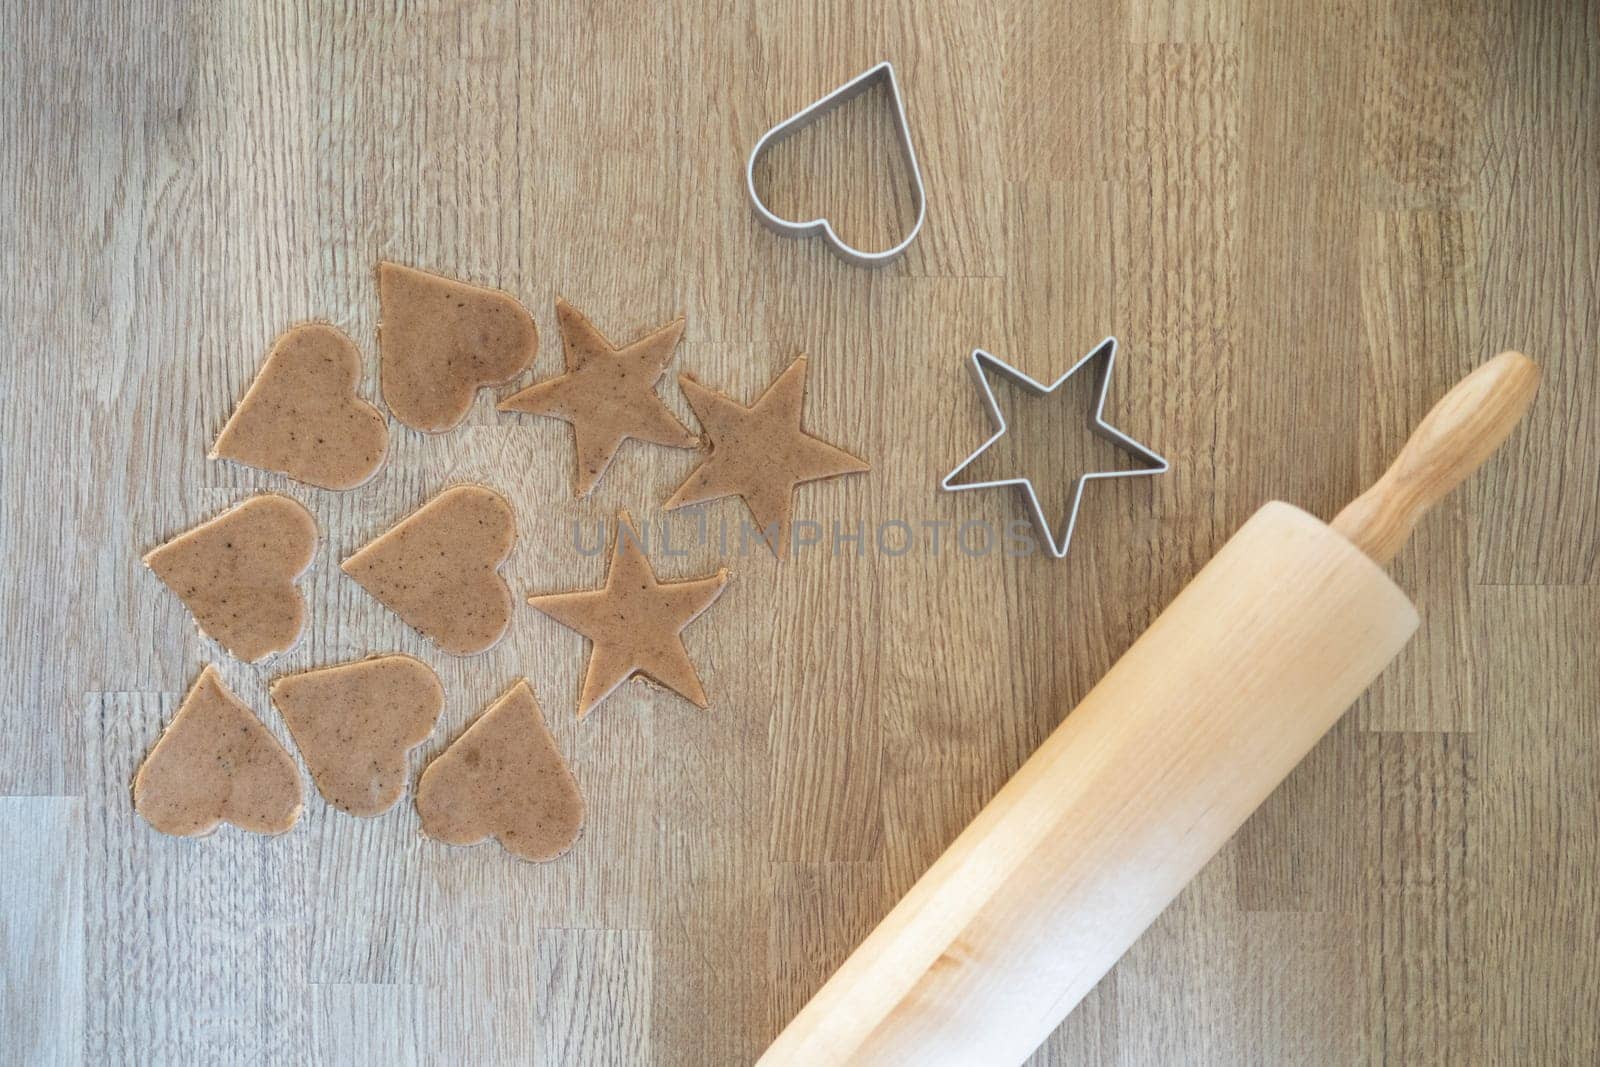 Preparing bakery in kitchen, homemade Christmas ginger bread cookies with rolling pin and kitchen utensil, Xmas gingerbread cookie on wooden tray, process of baking and cooking at home